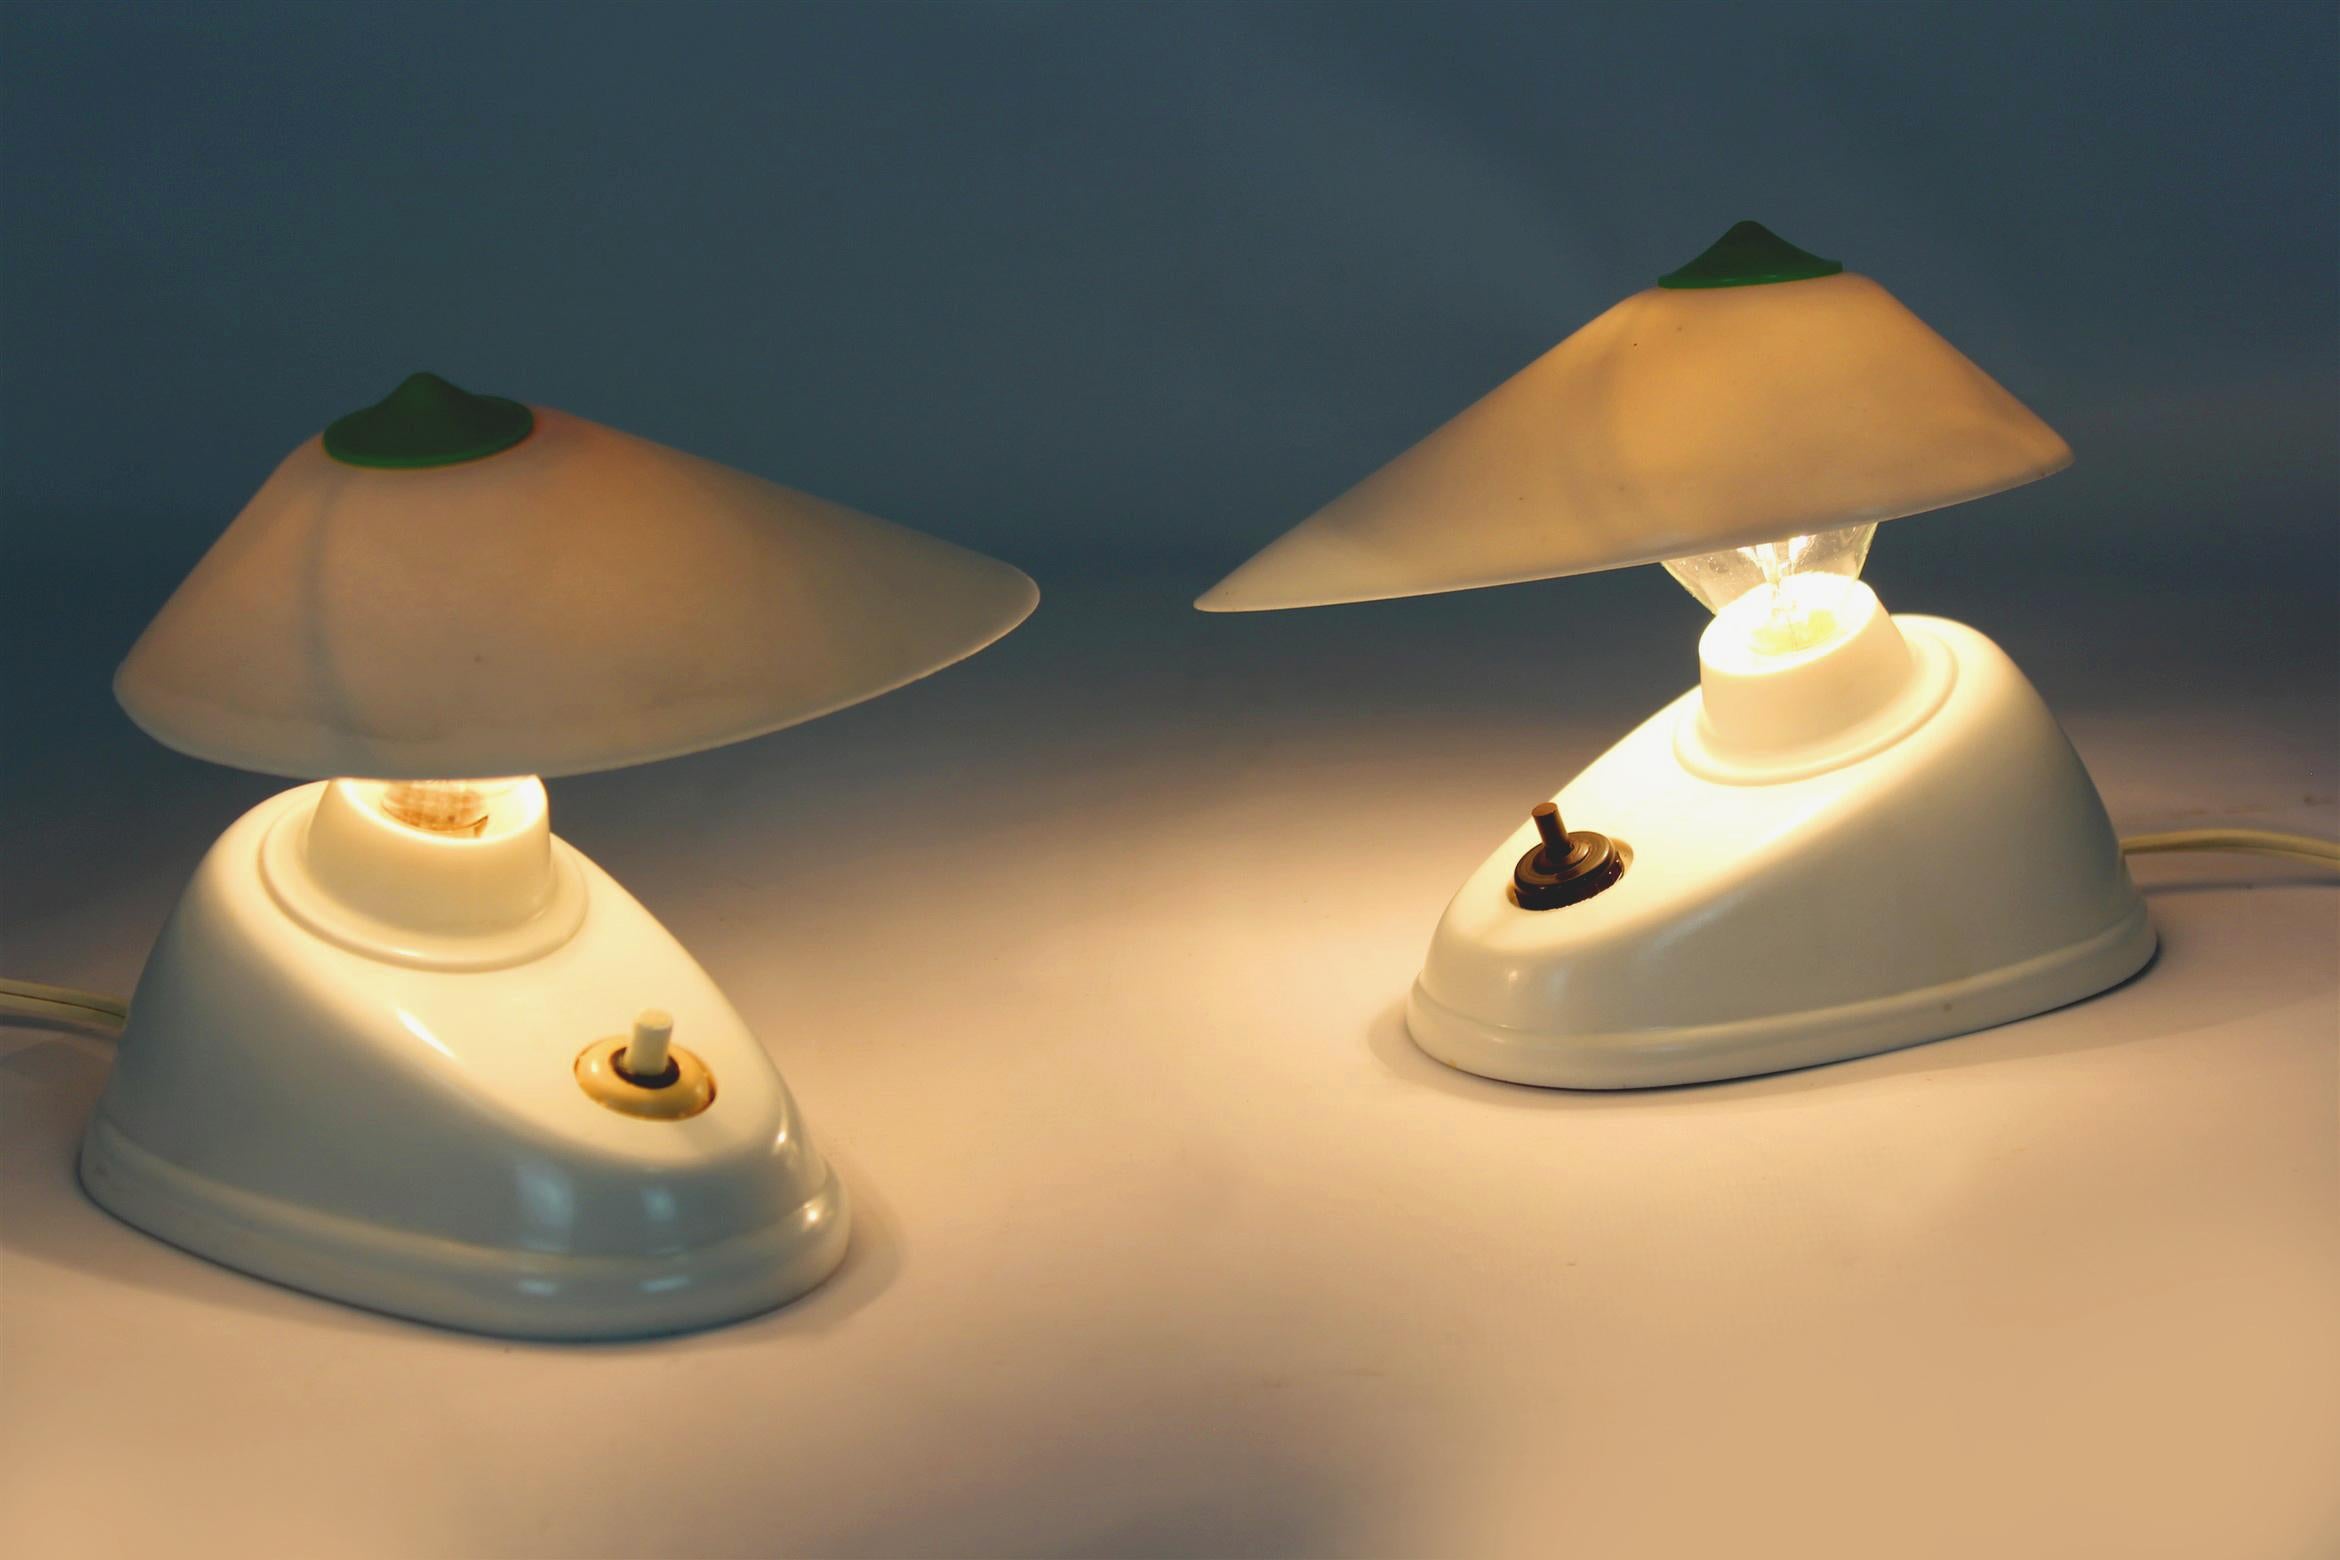 
A set of two bakelite table lamps in the Bauhaus style, produced in Czechoslovakia in the 1940s. Asymmetrical form, adjustable angle of the lampshade. The lamps have a visible model designation (11641) and the manufacturer's logo (ESC).
Preserved